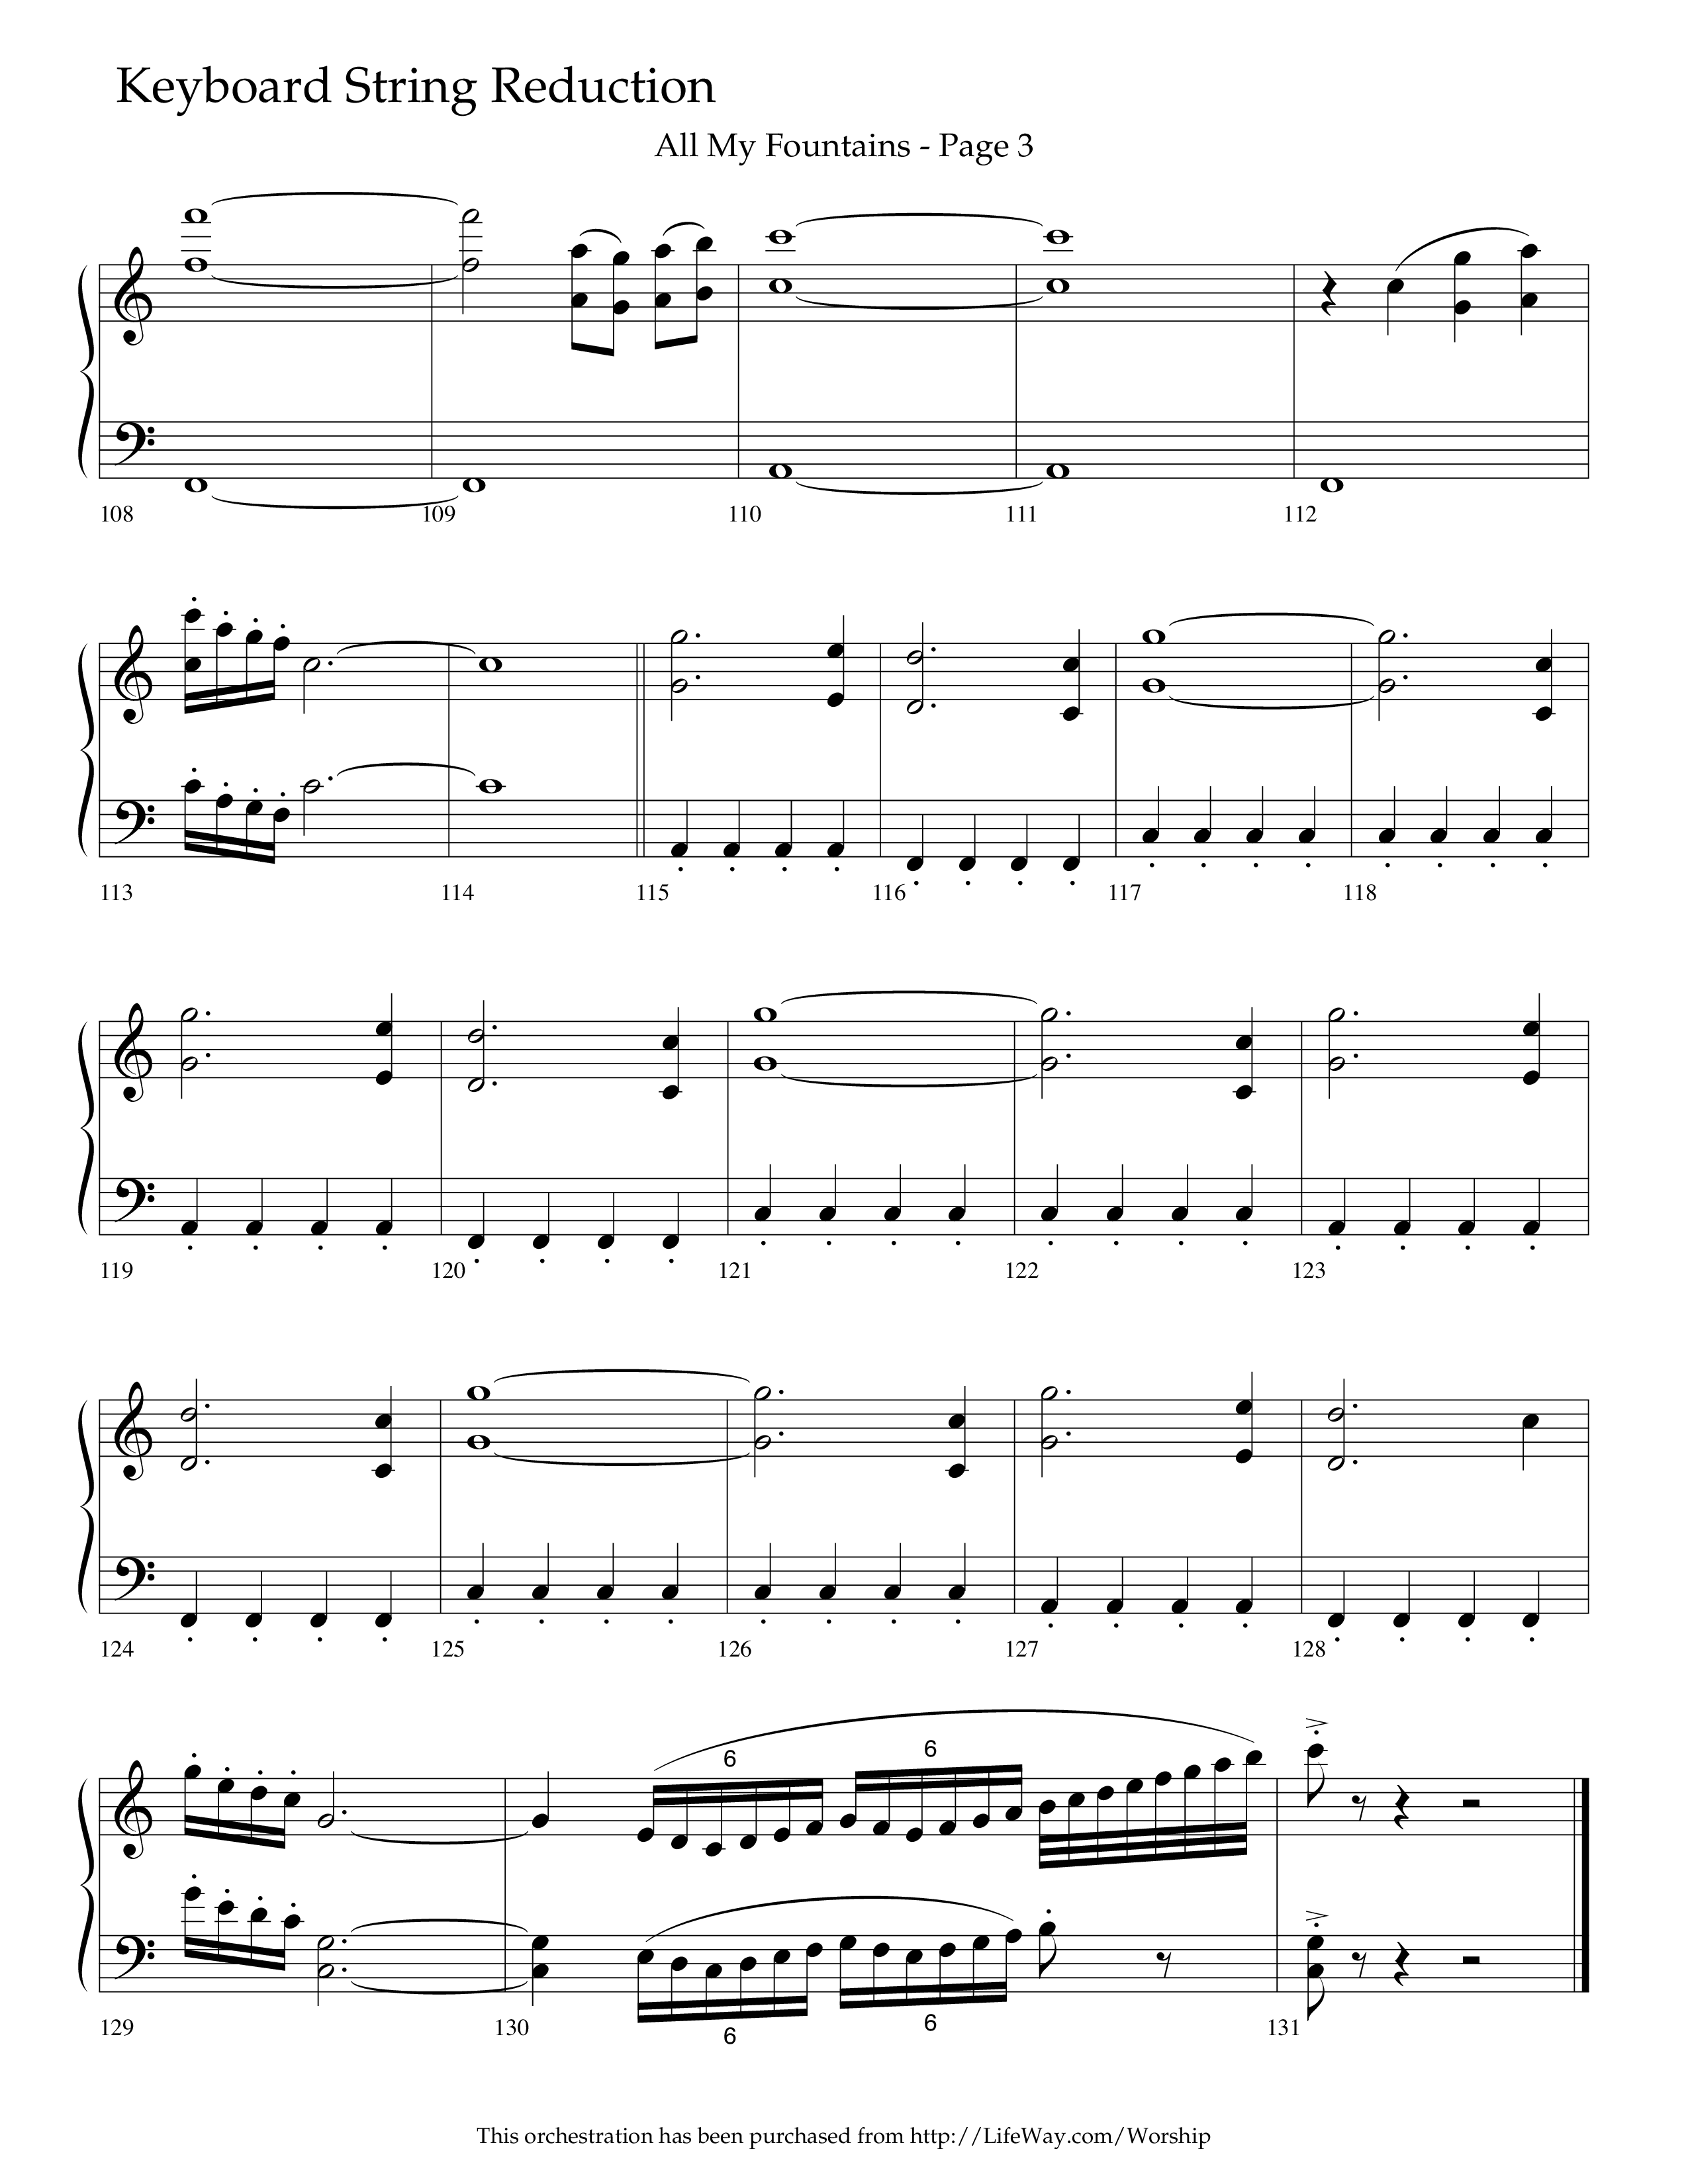 All My Fountains (Choral Anthem SATB) String Reduction (Lifeway Choral / Arr. Russell Mauldin)